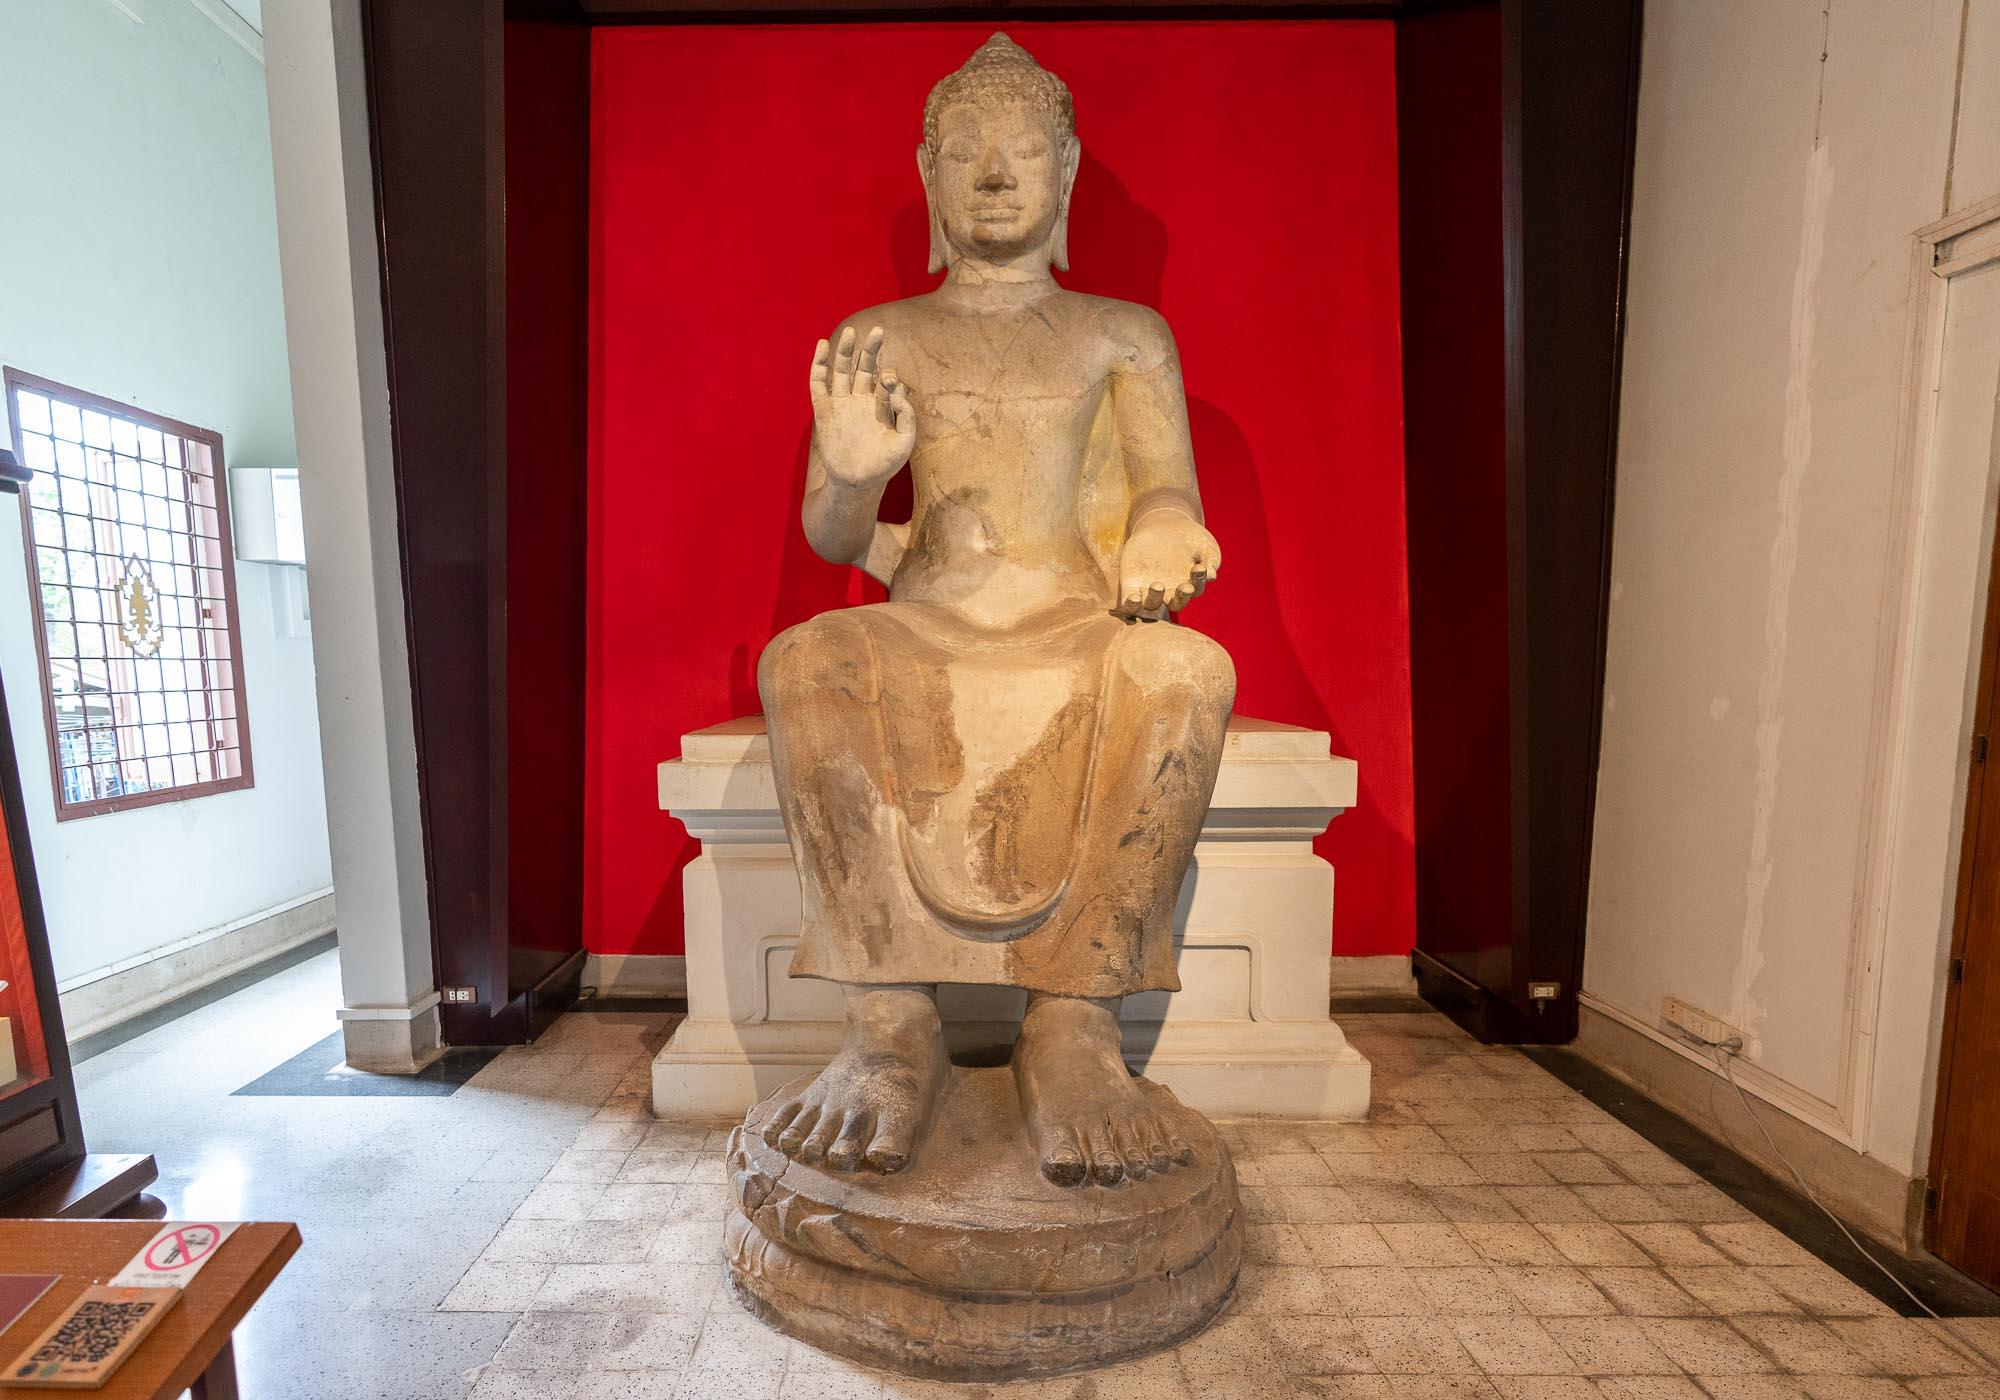 A highlight of the museum is this large seated Buddha statue from the Dvaravati period. – © Michael Turtle